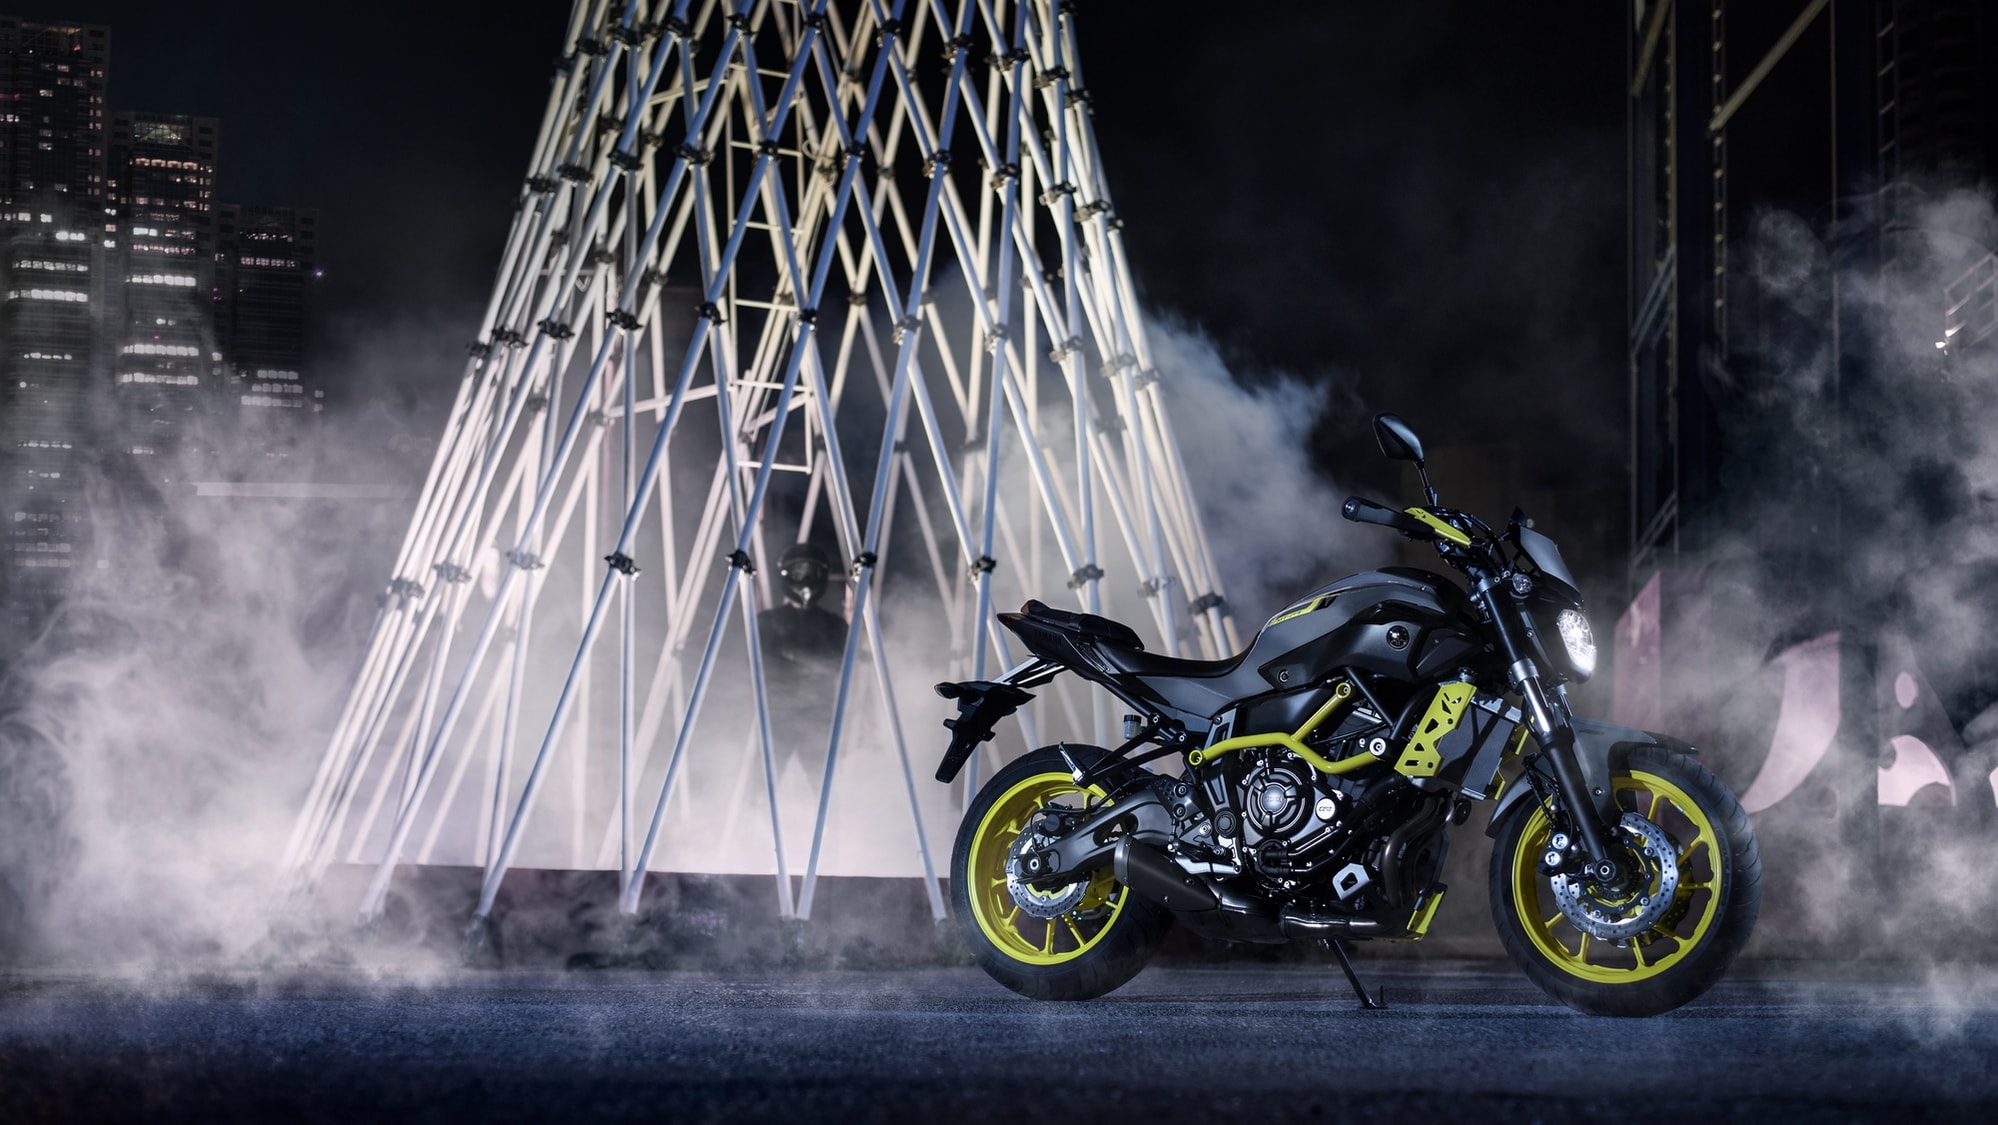  Yamaha  Adds Night Fluo to More MT Bikes Shows the MT 07 